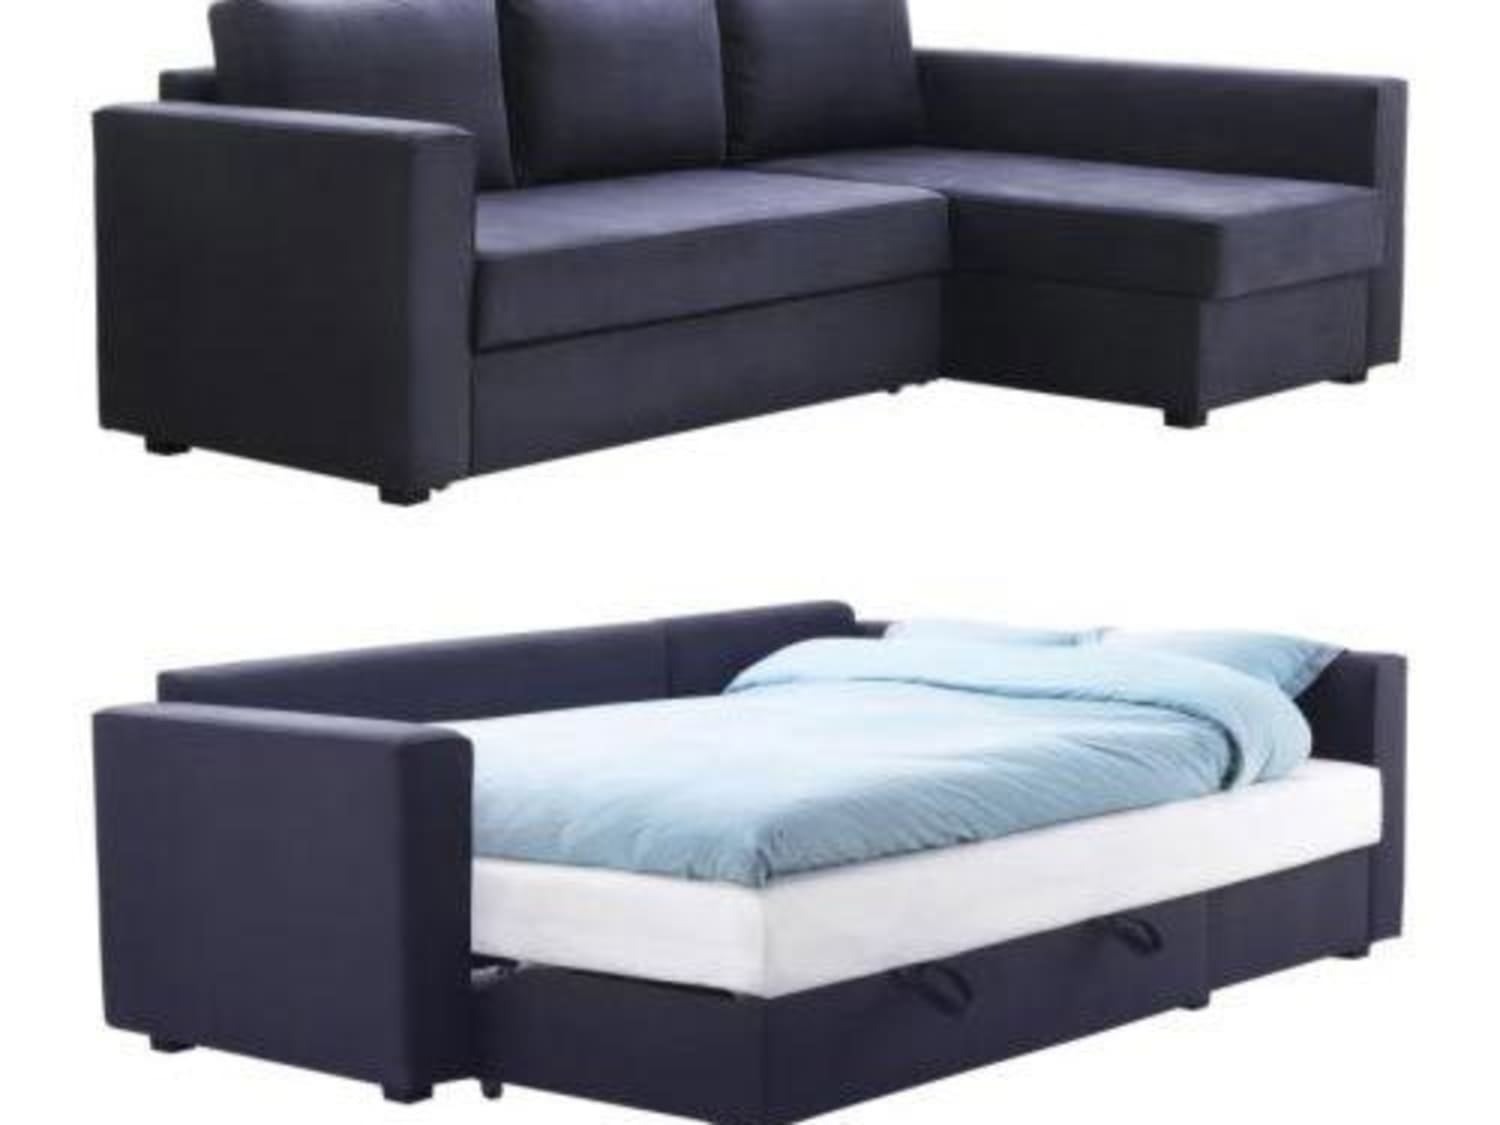 Daarbij Vereniging water MANSTAD Sectional Sofa Bed & Storage from IKEA | Apartment Therapy